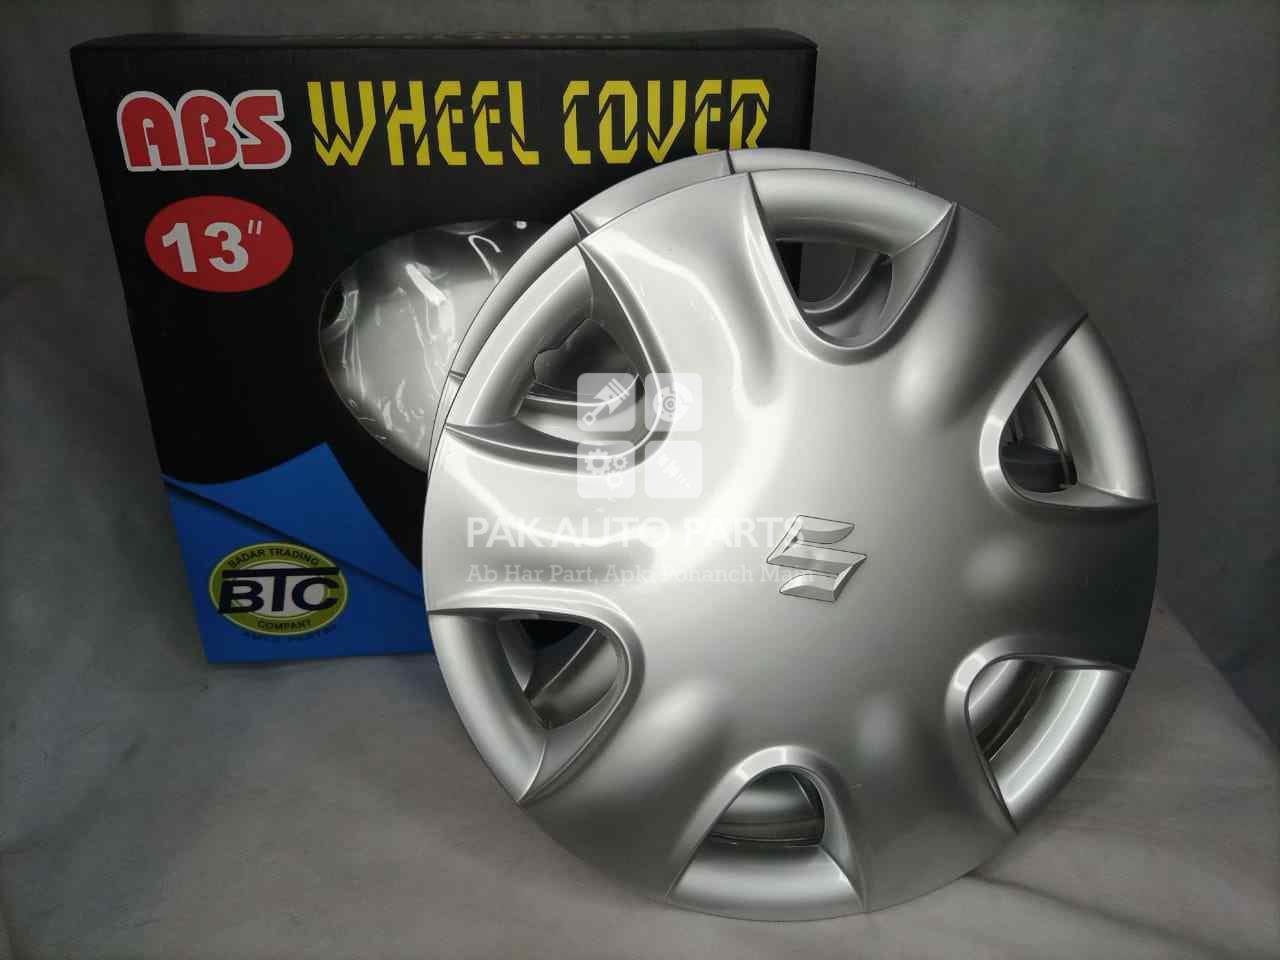 Picture of Suzuki 13 inch ABS  Wheel Covers